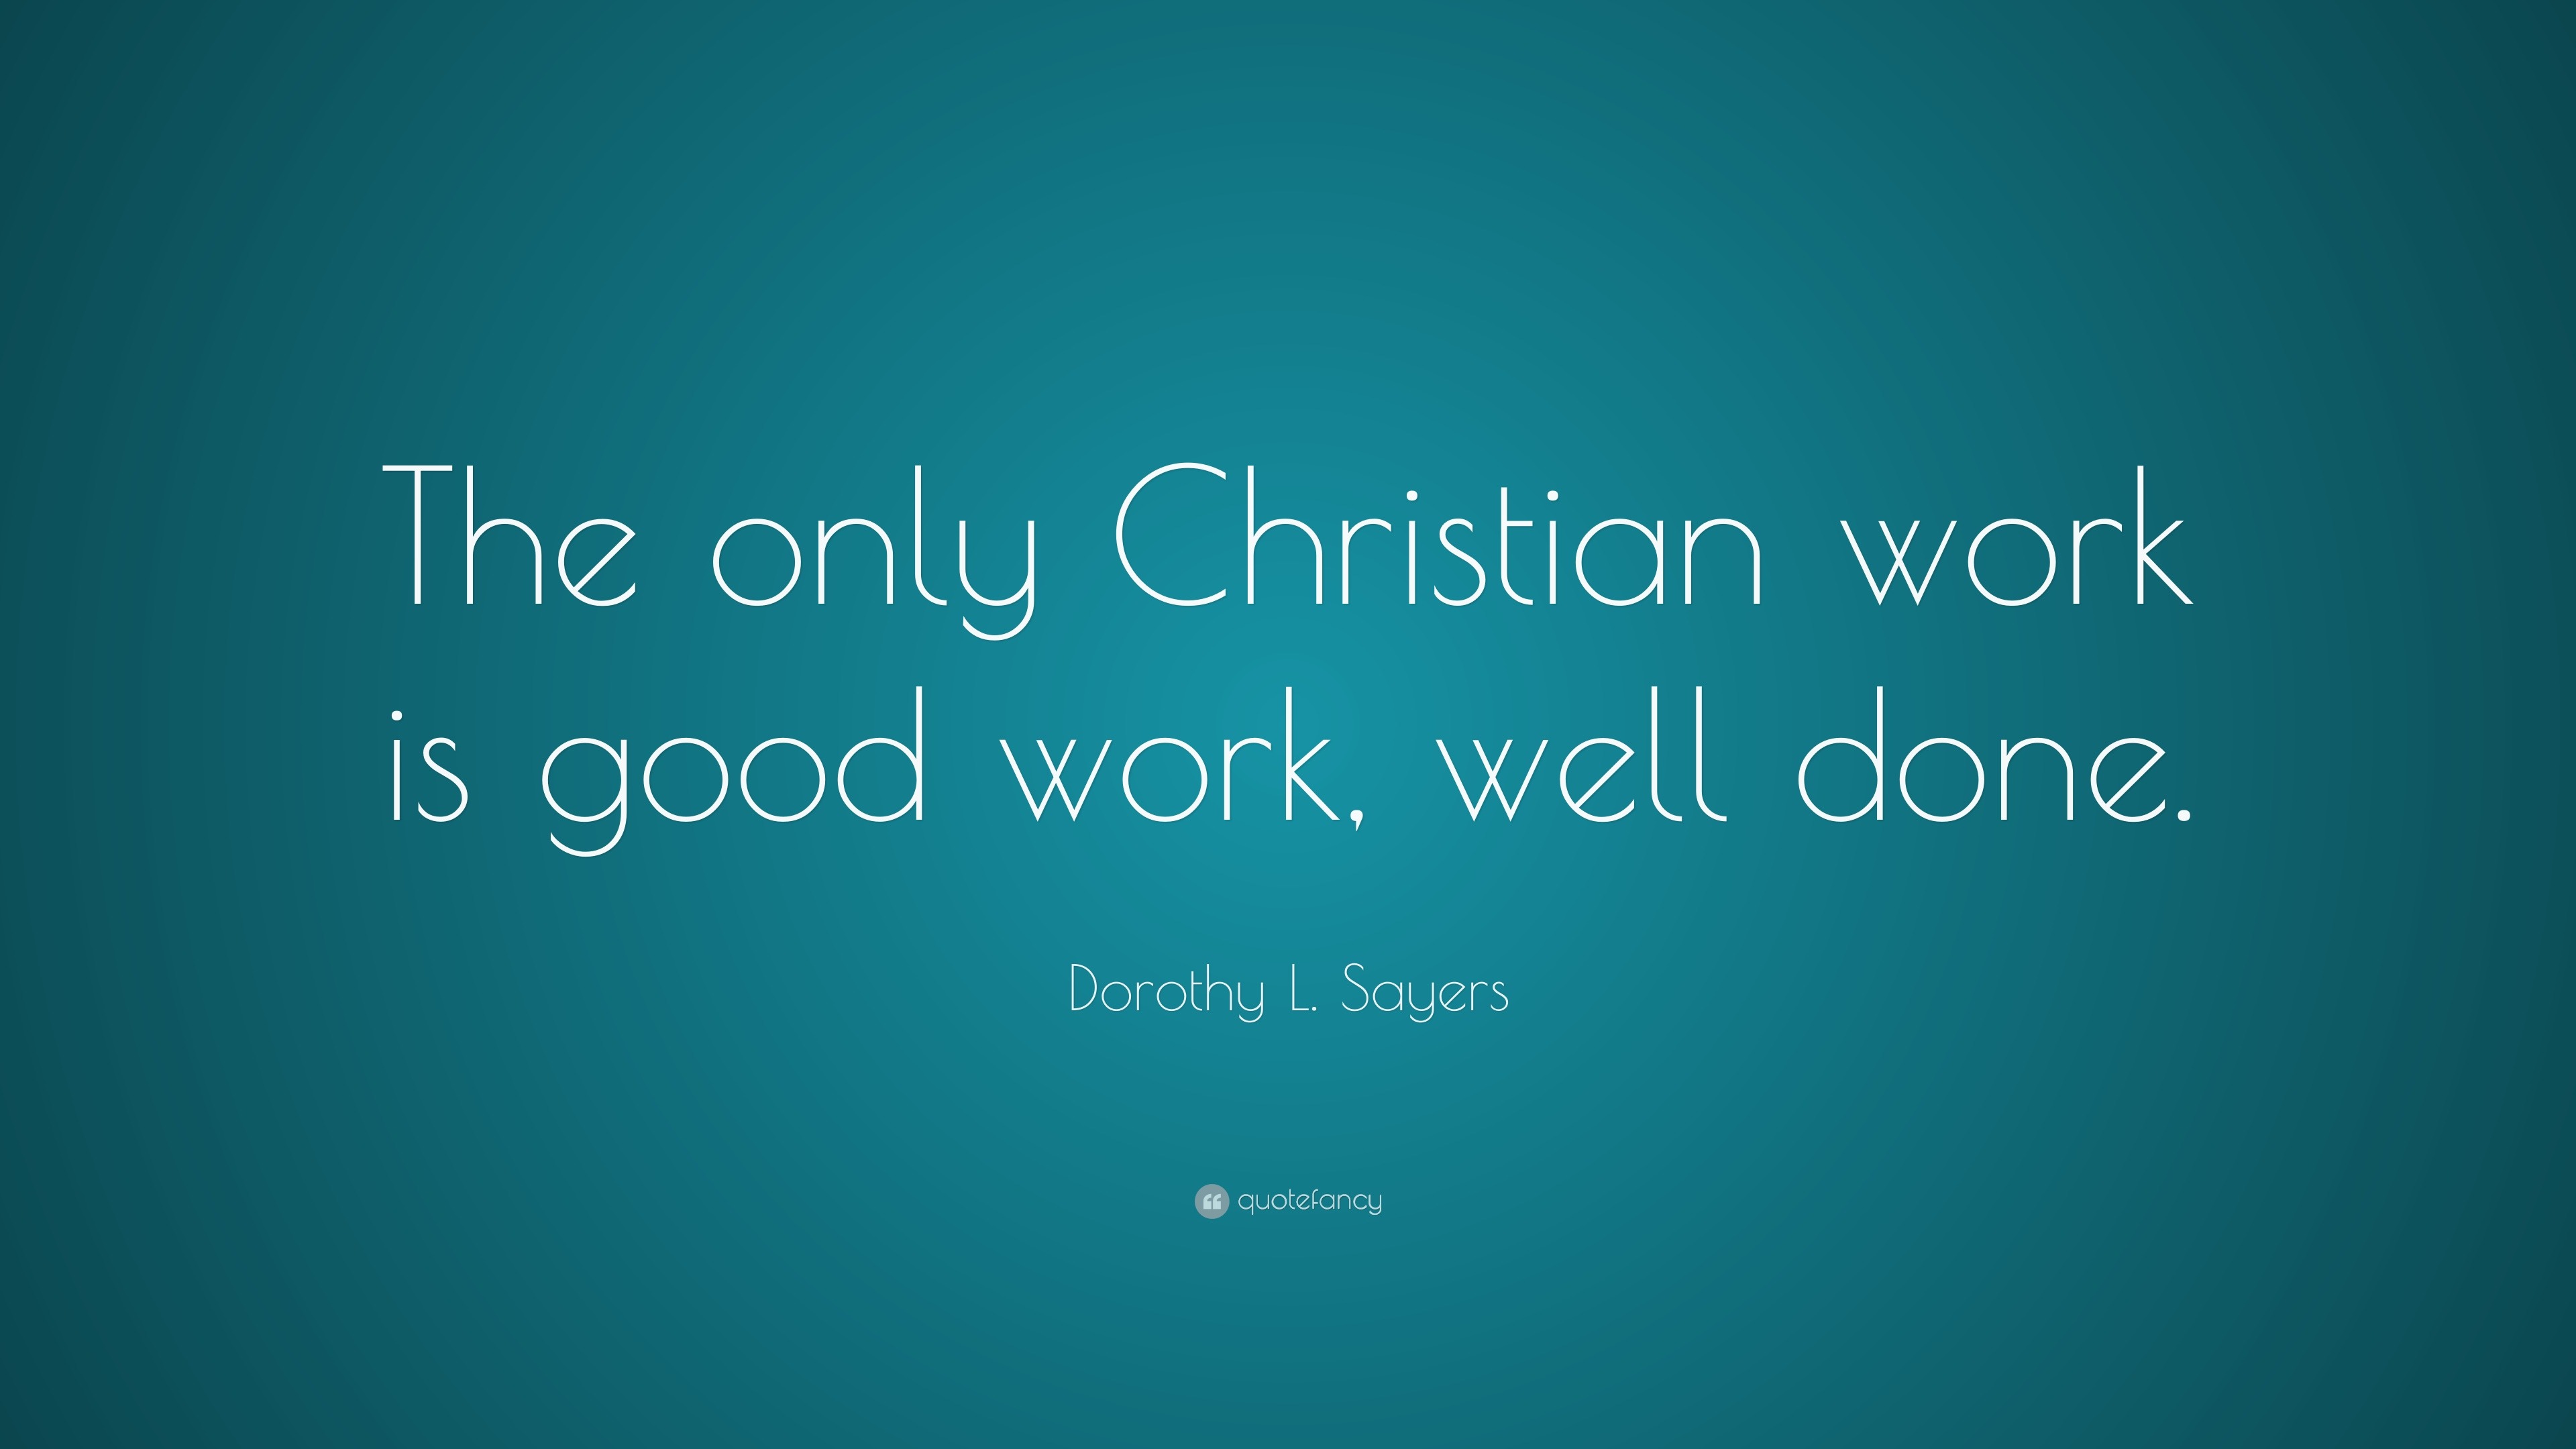 Dorothy L. Sayers Quote “The only Christian work is good work, well done.”